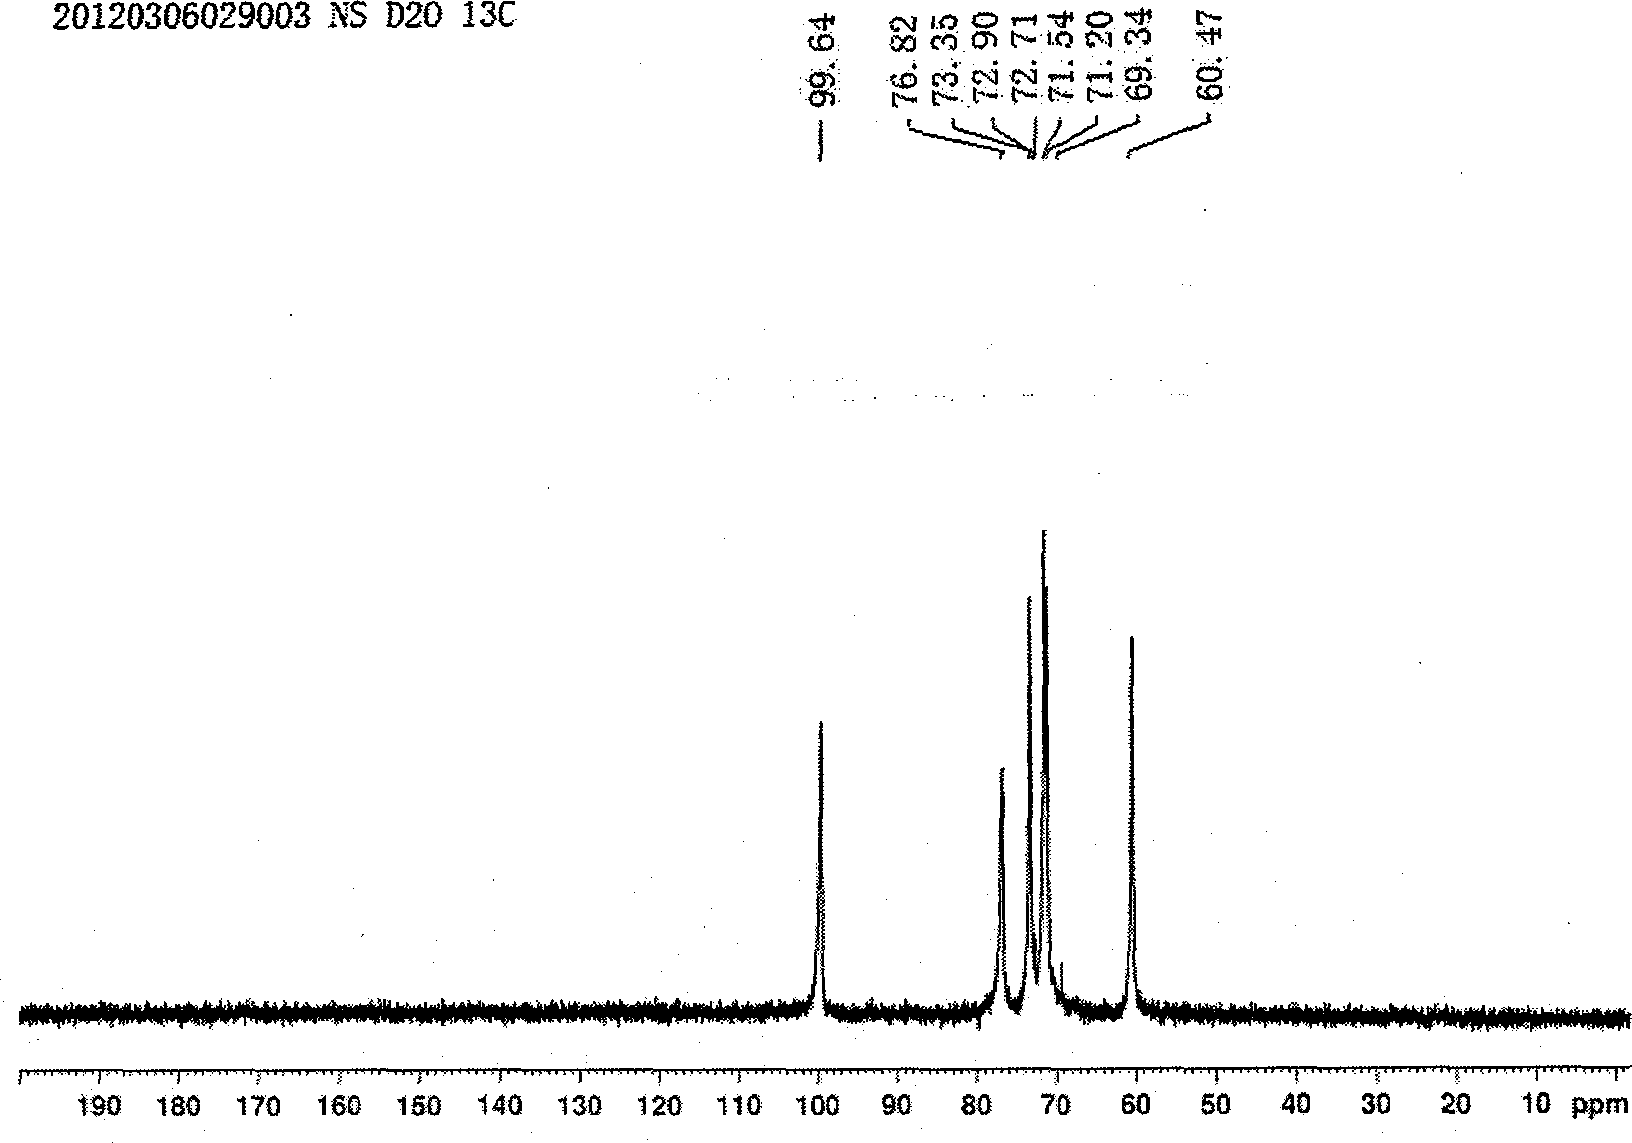 Carbonyl starch oxidized by Fenton similar system, and preparation method of carbonyl starch